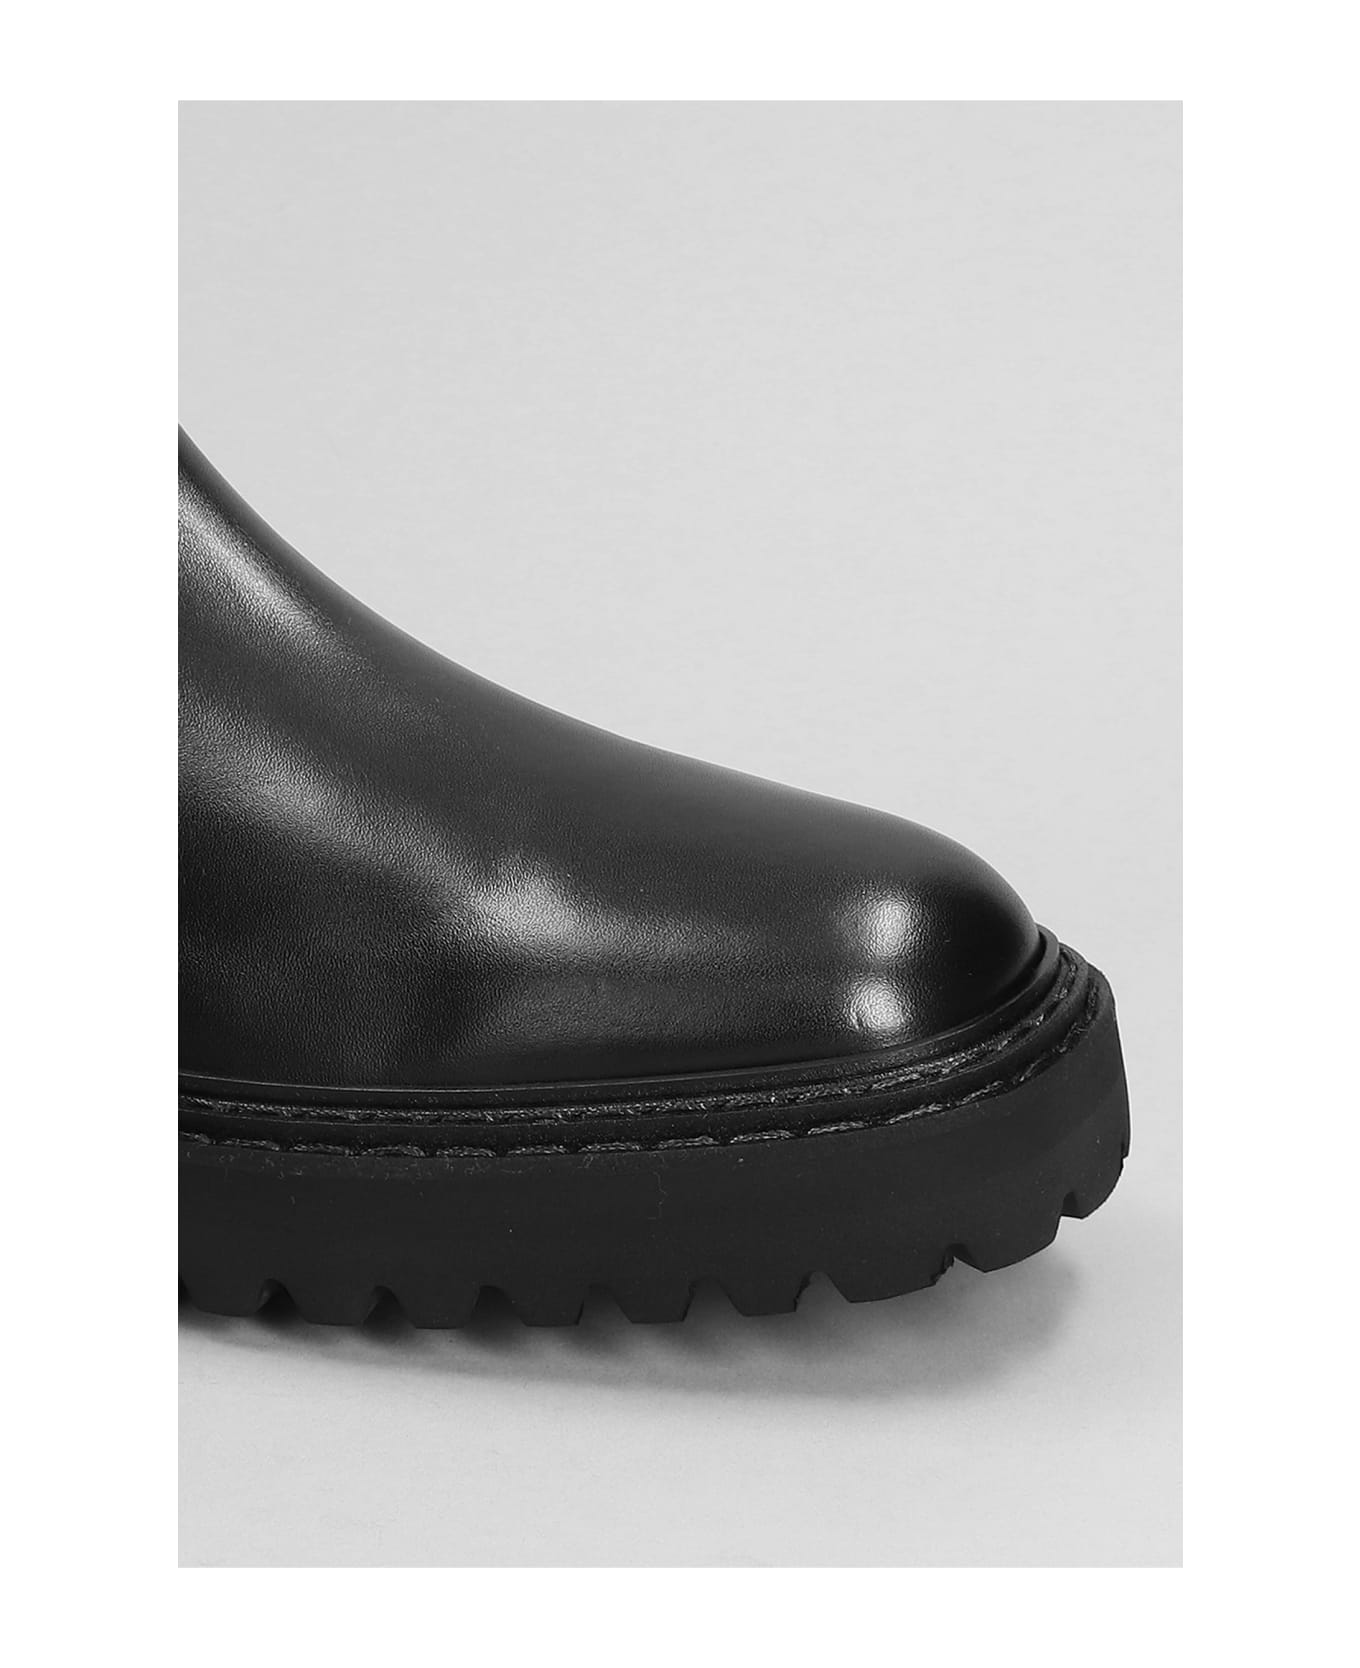 Officine Creative Pistols 003 Ankle Boots In Black Leather - black